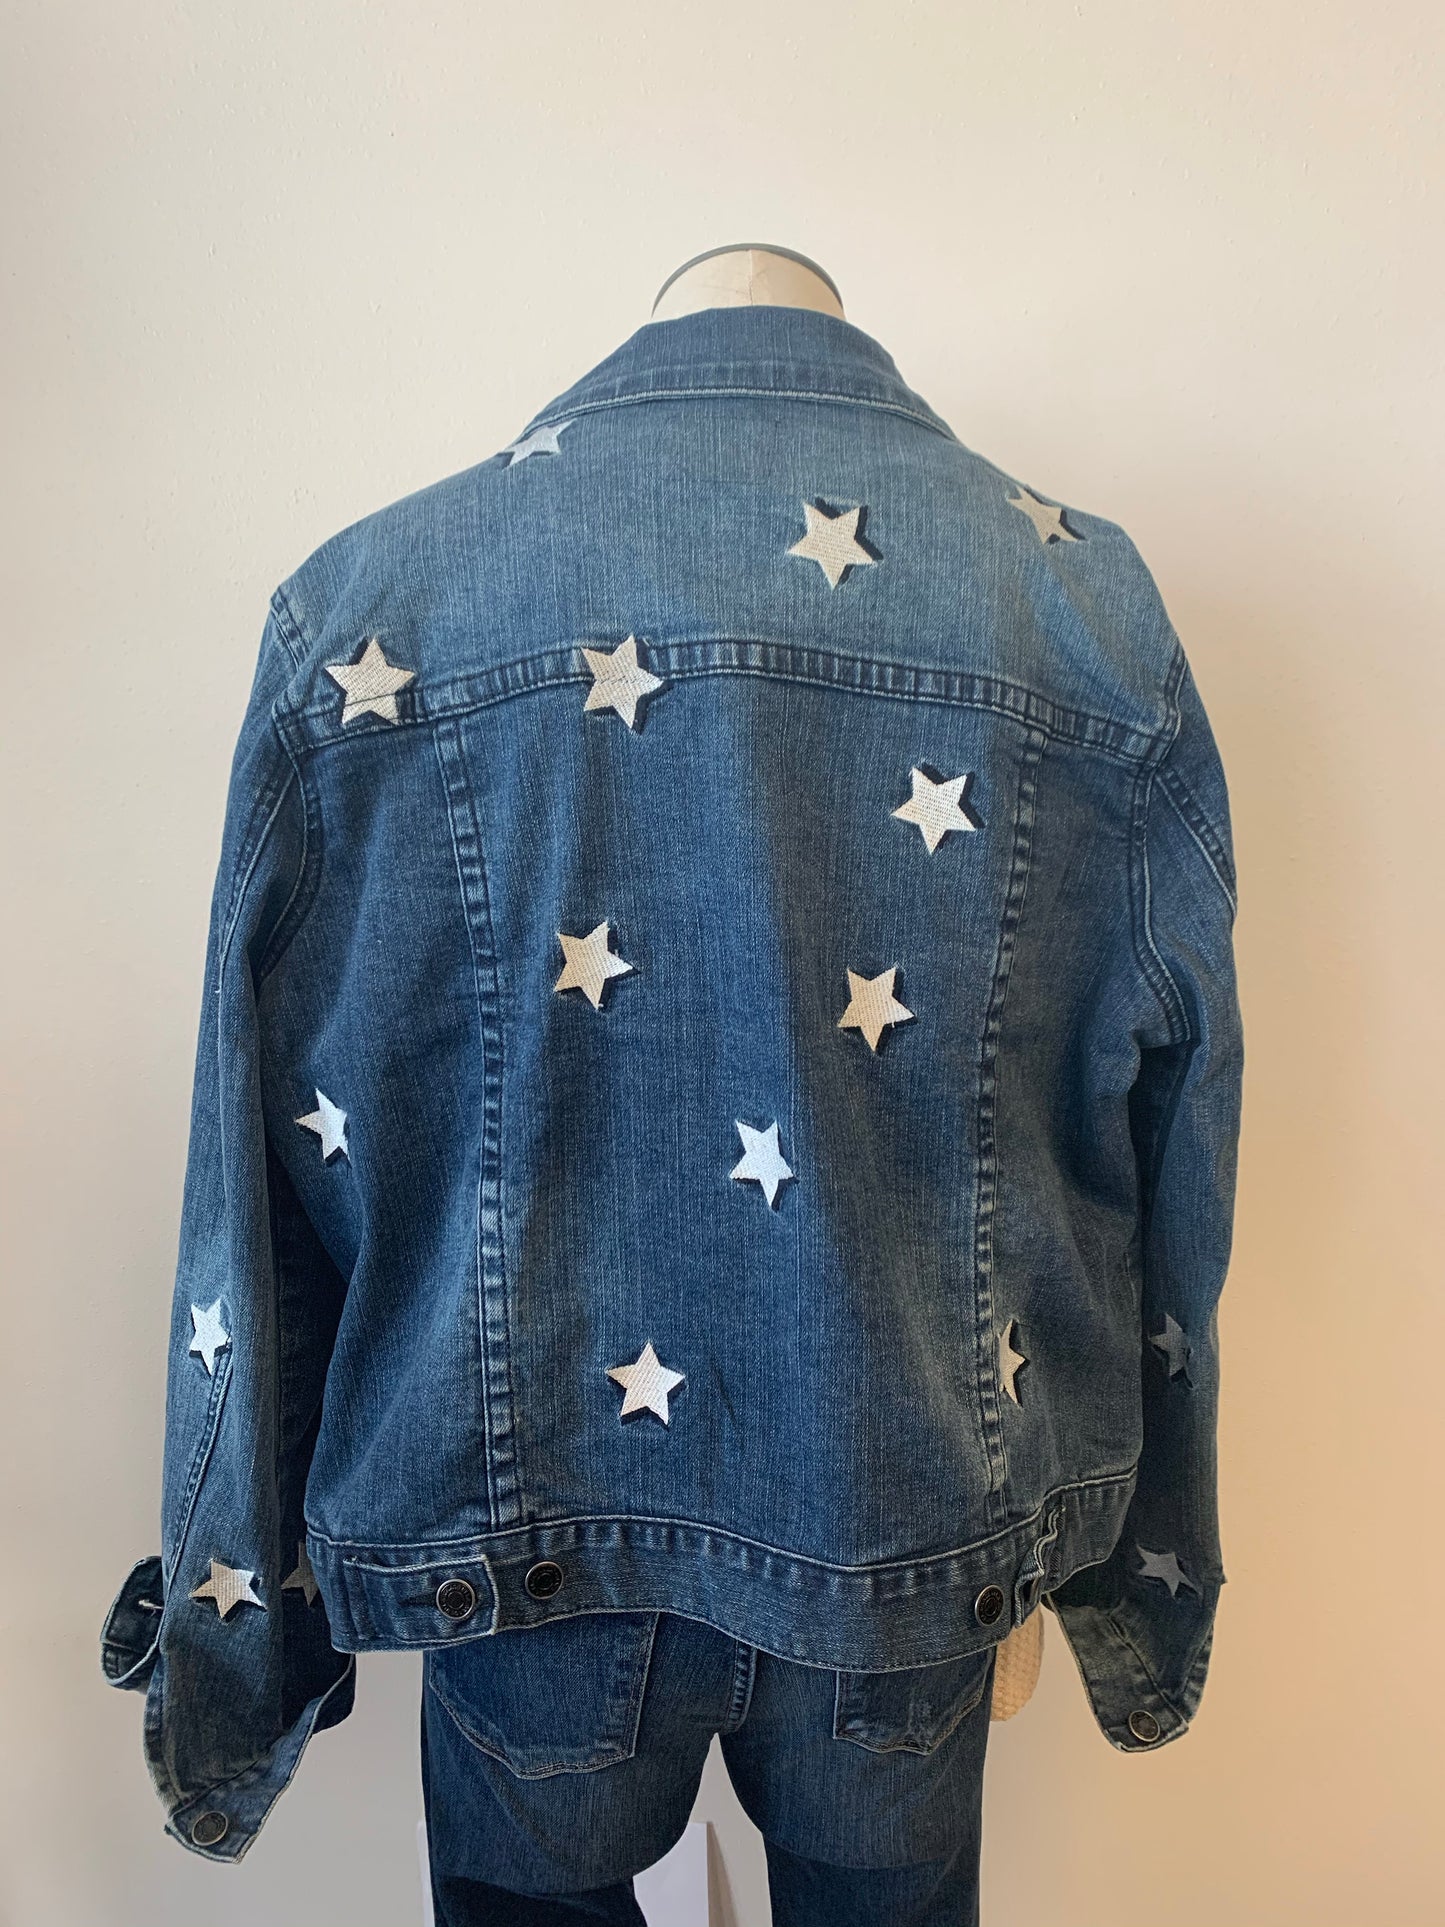 Star Patches Jean Jacket